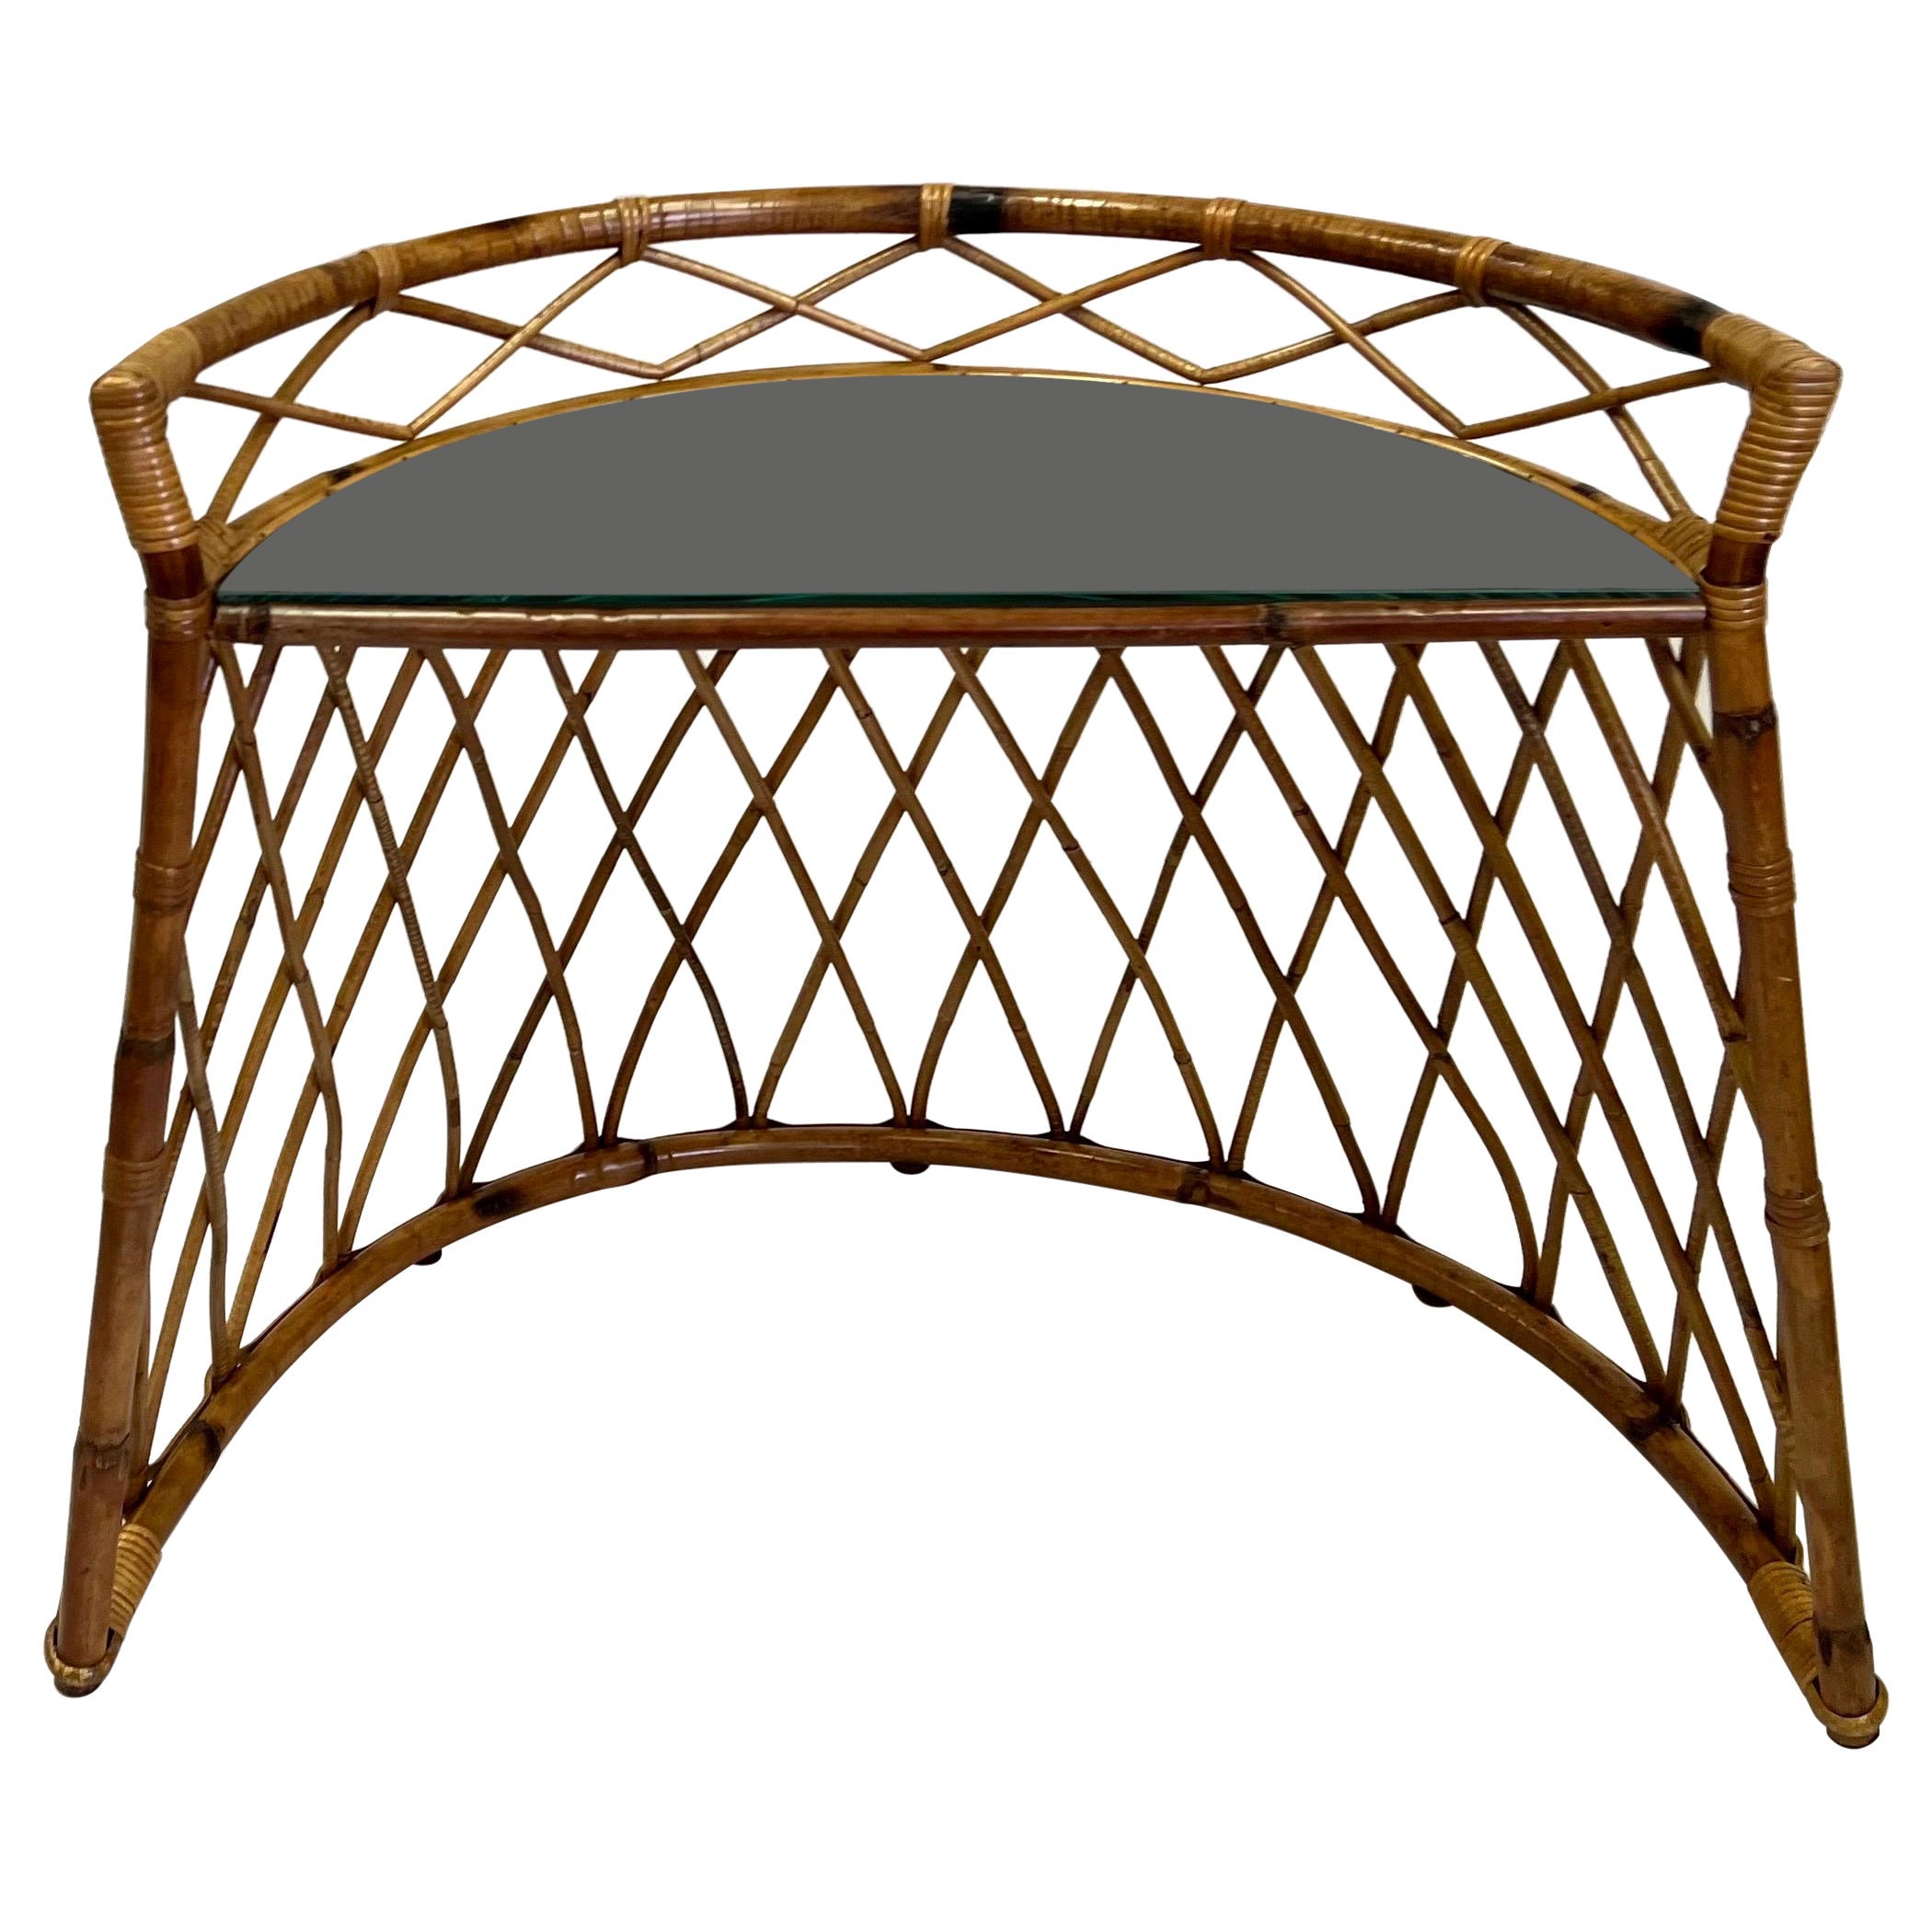 French Mid-century Modern Neoclassical Bamboo Rattan Console or Desk